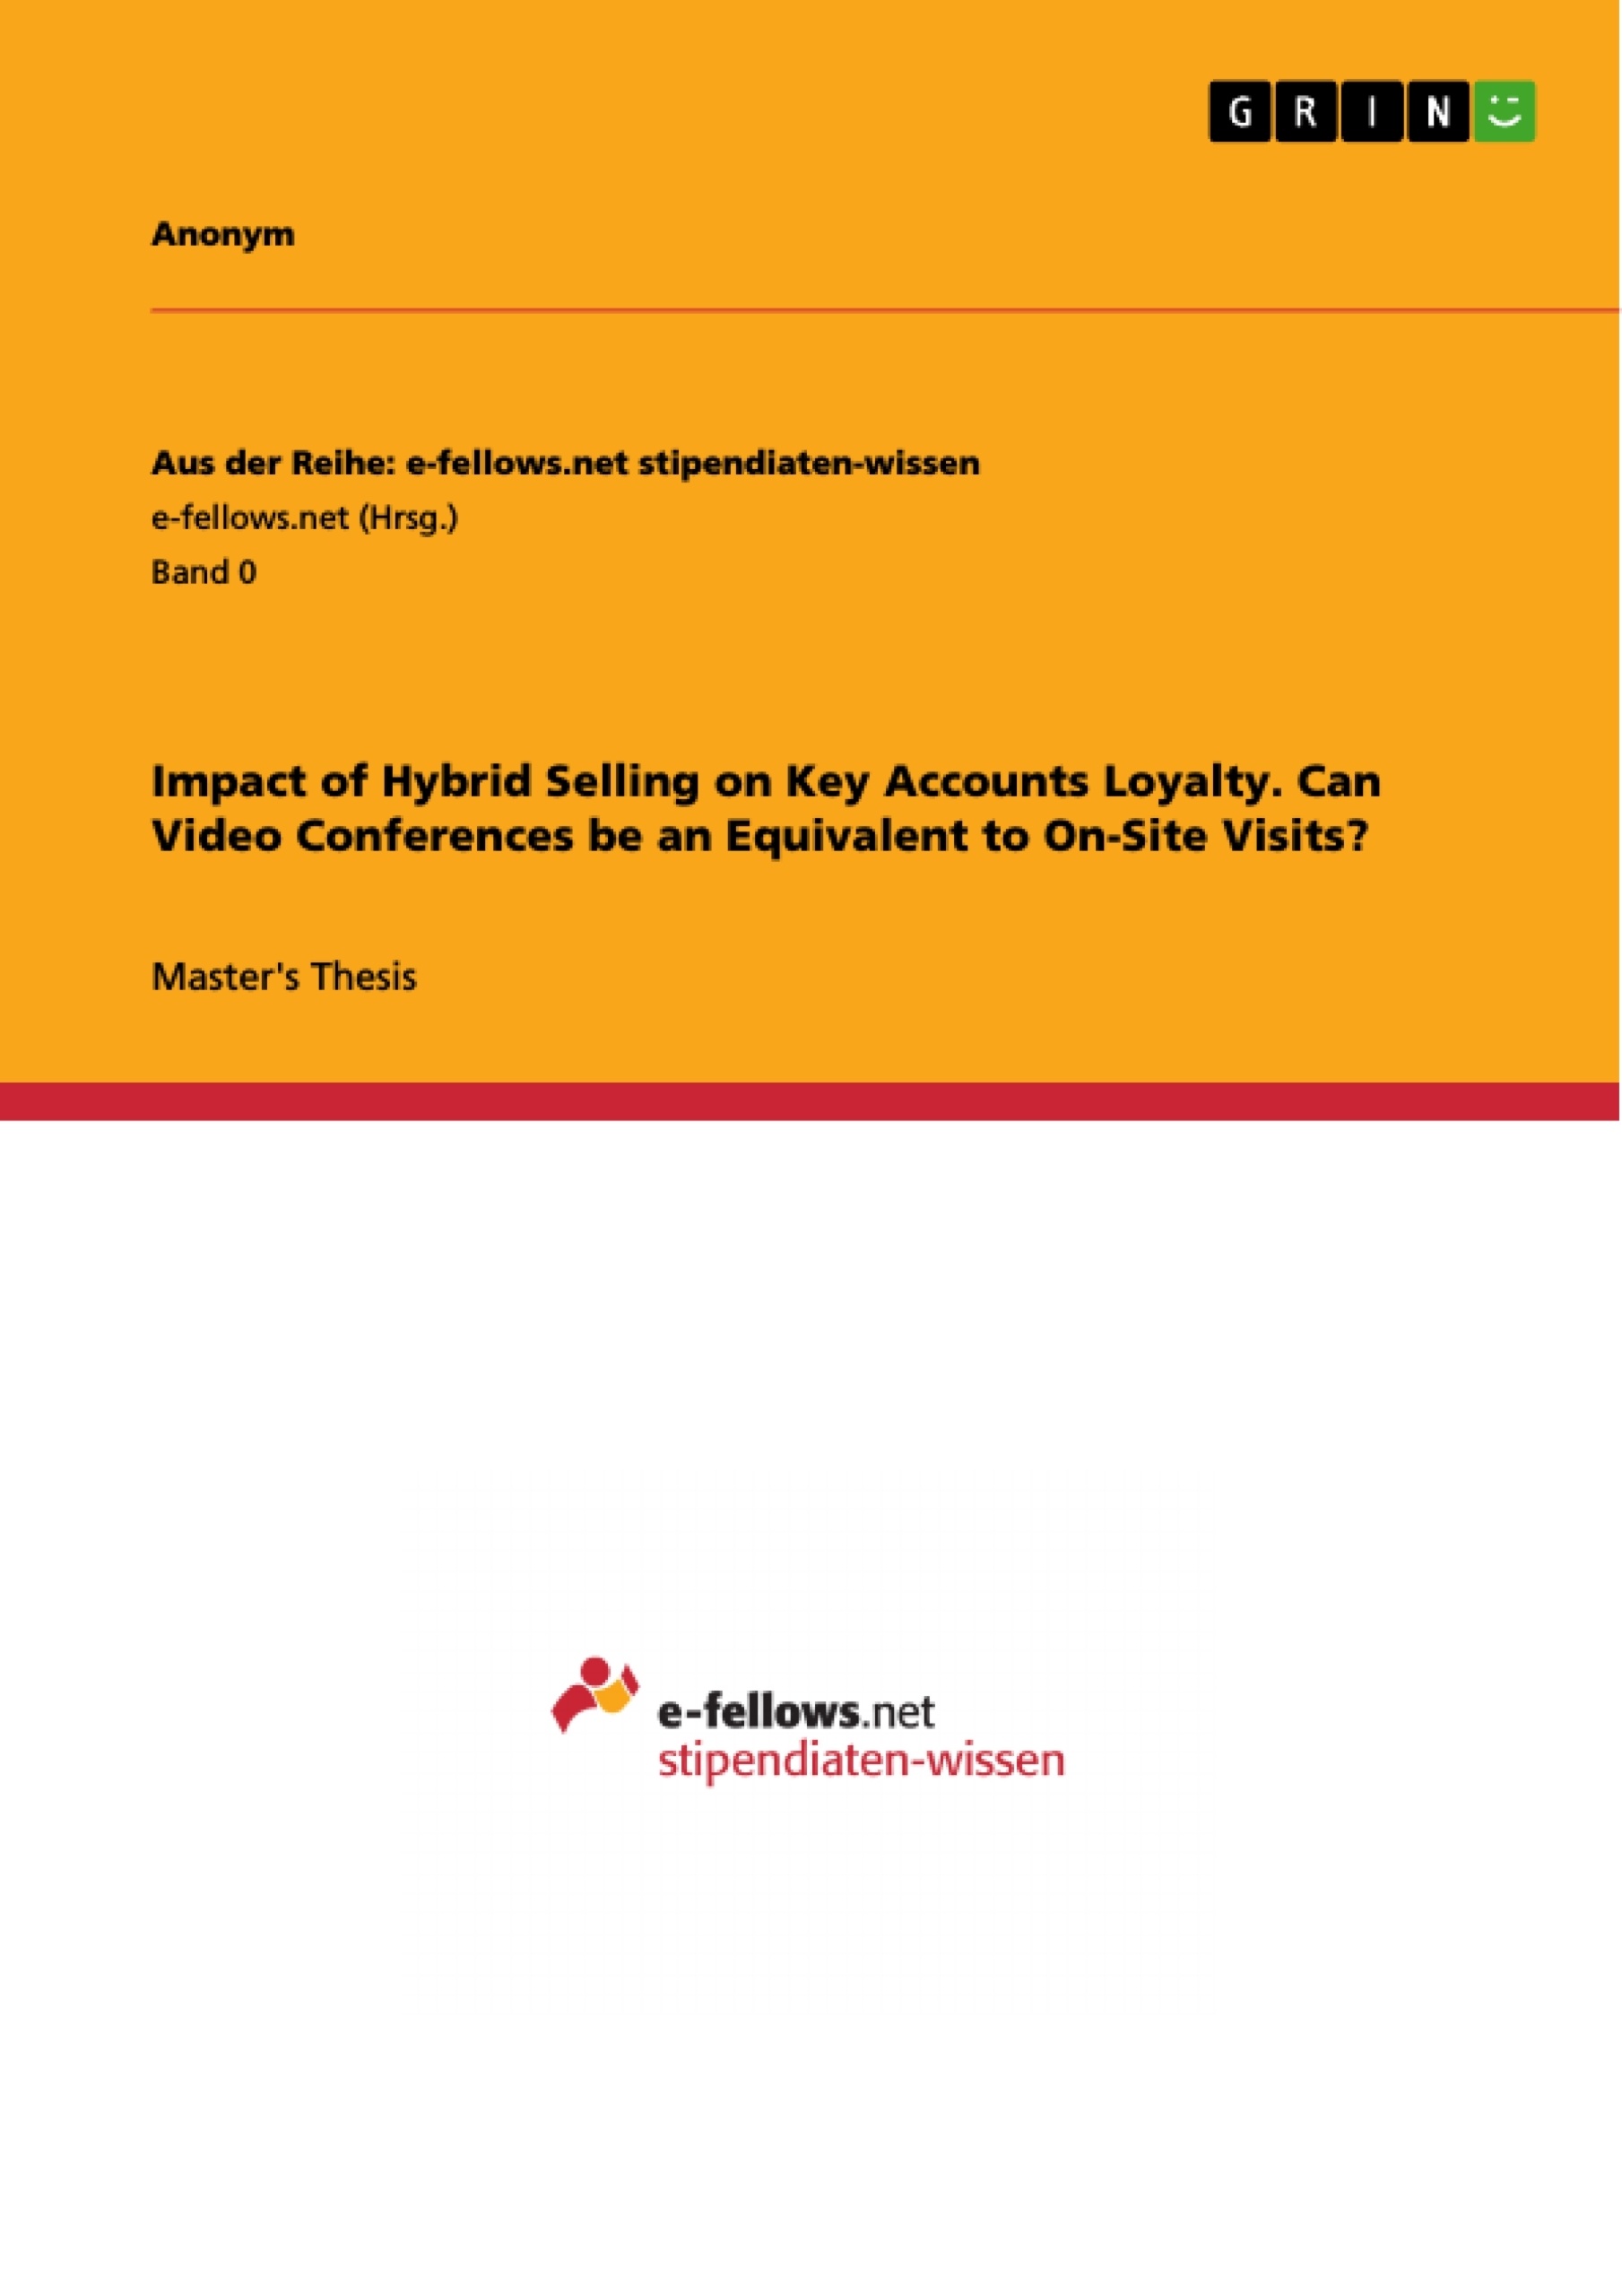 Title: Impact of Hybrid Selling on Key Accounts Loyalty. Can Video Conferences be an Equivalent to On-Site Visits?